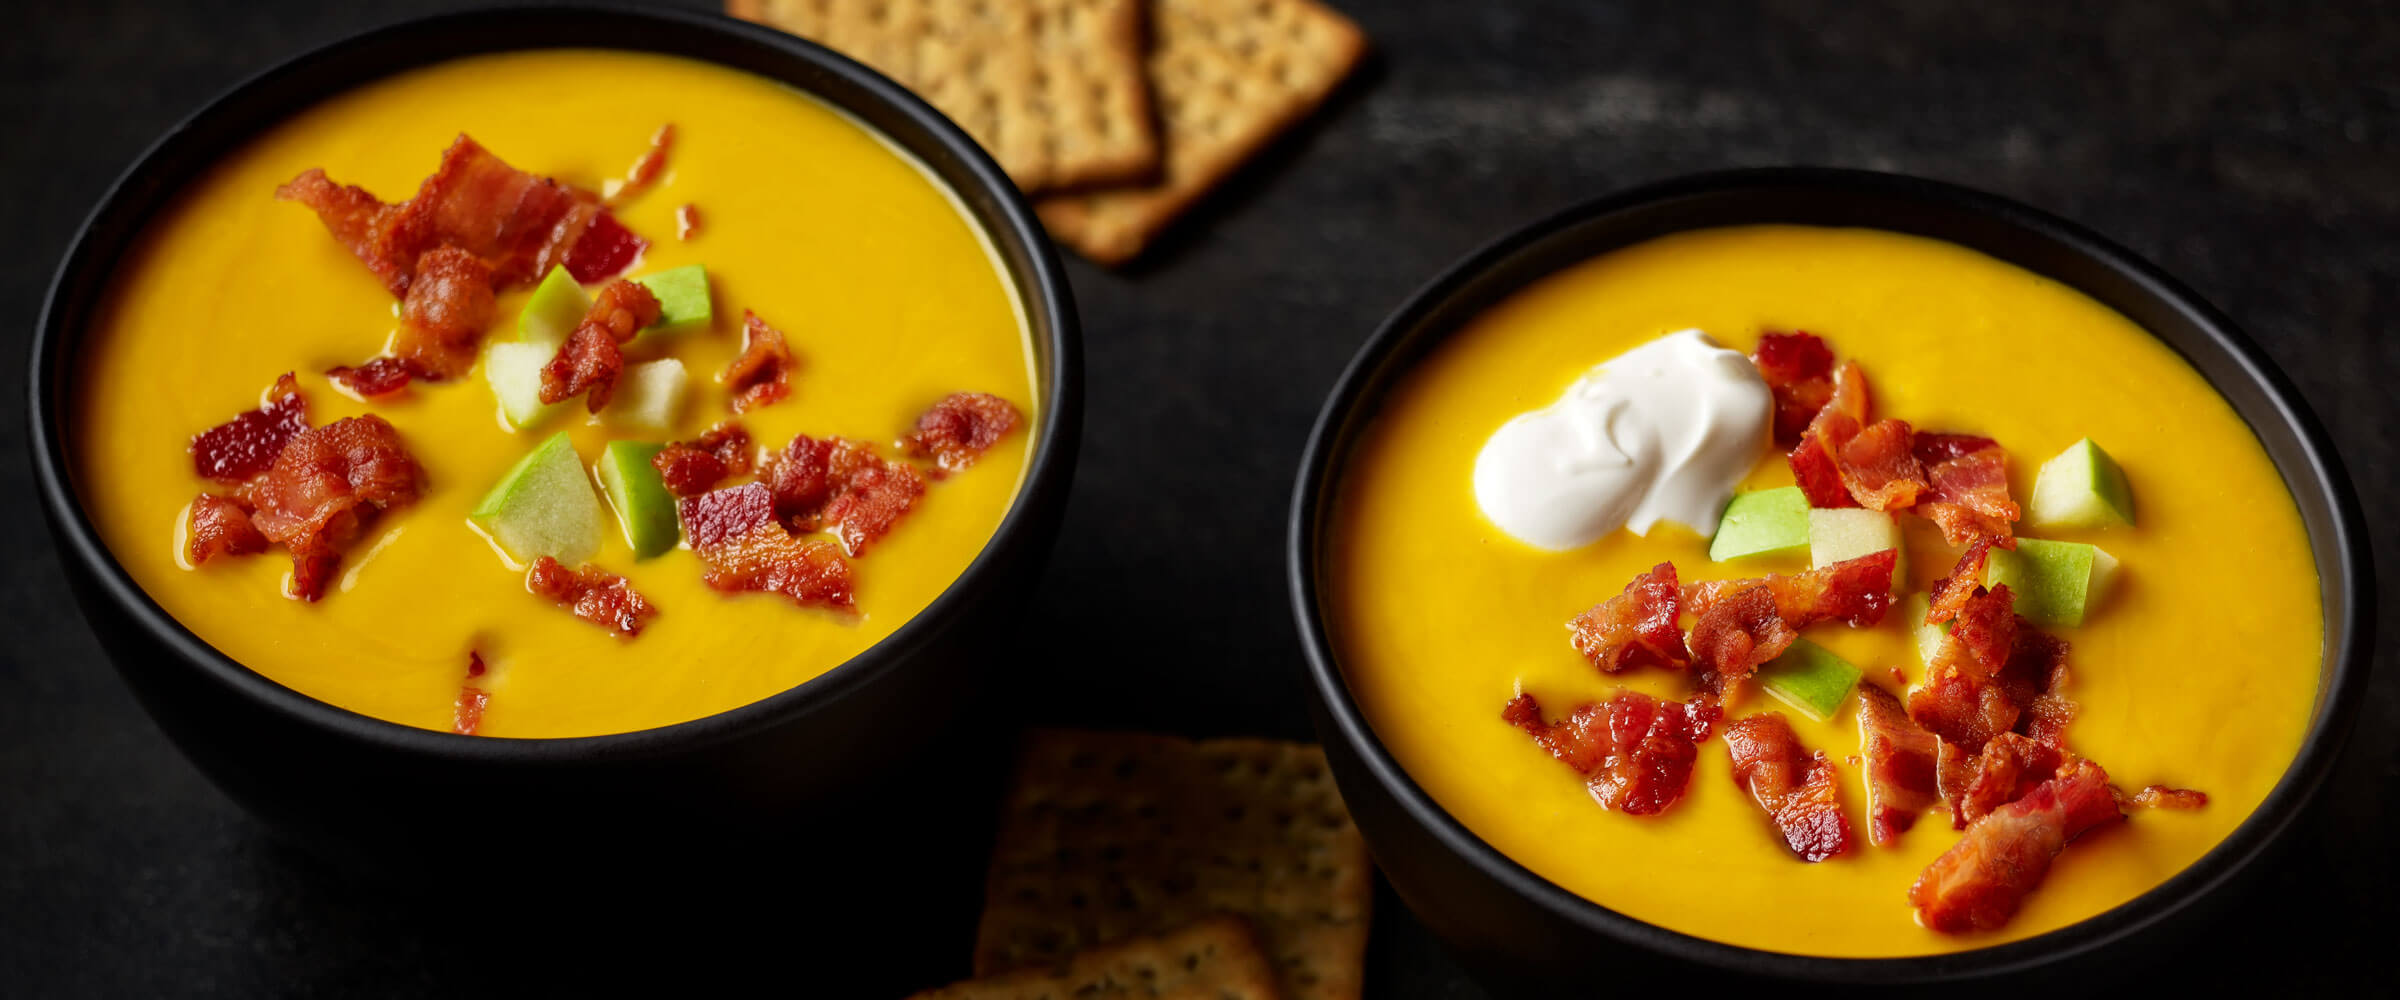 Butternut Squash Soup with Bacon, Apple and Sour Cream in black bowls